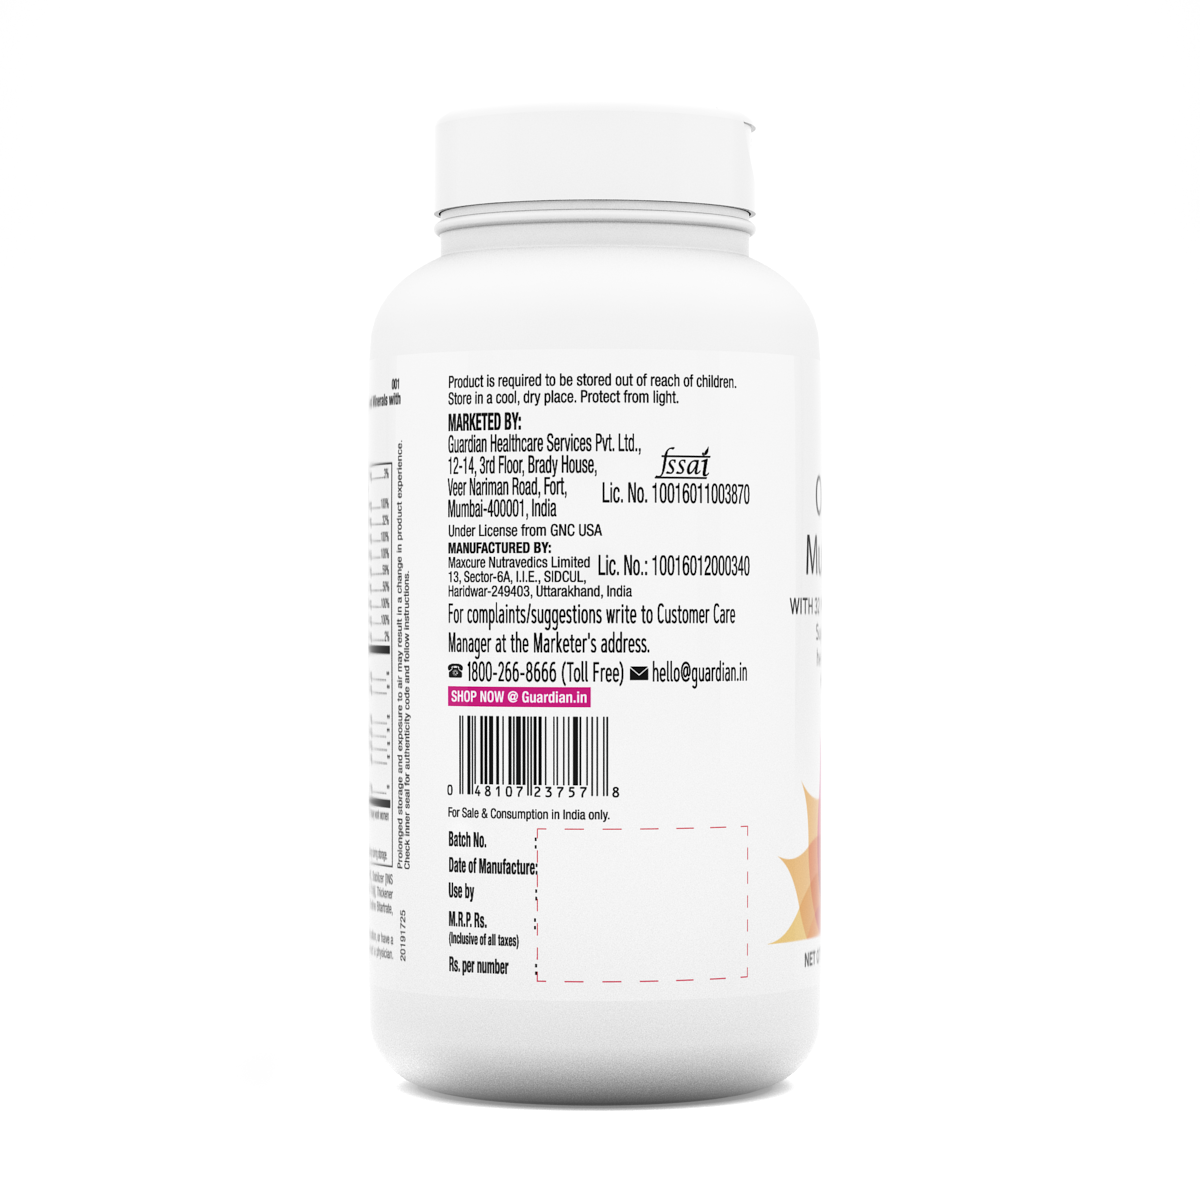 GNC Womens One Daily Multivitamin + Triple Strength Fish Oil - Boosts Energy & Immunity | Maintains Healthy Cholesterol 